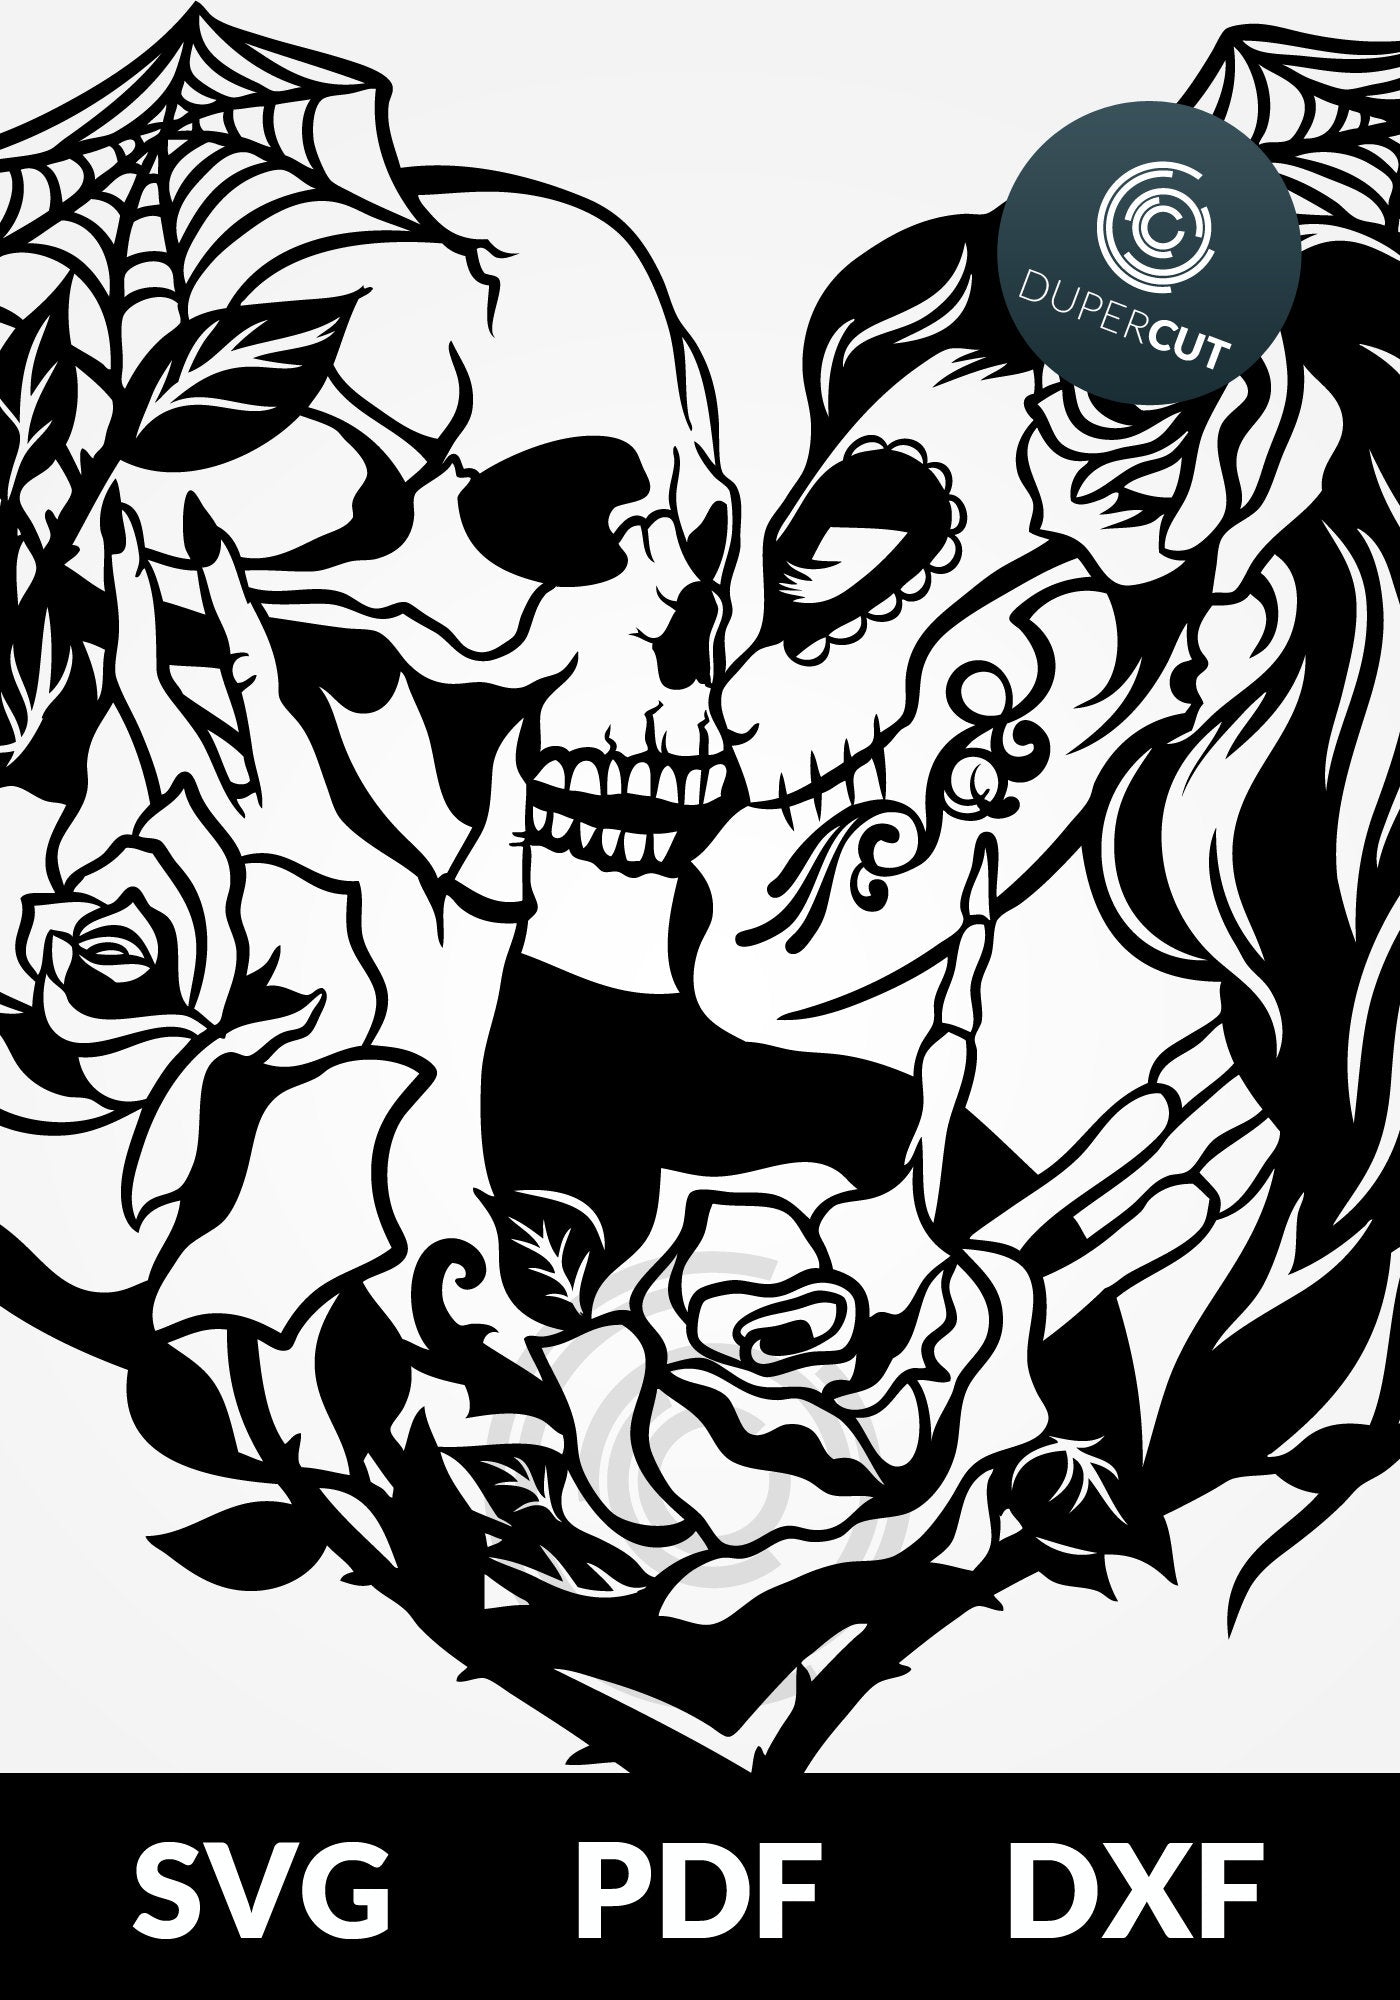 Sugar skull couple, gothic tattoo illustration. SVG PNG DXF files Paper cutting template for personal or commercial use. Vinyl template cutting files for Cricut, Glowforge, Silhouette, CNC